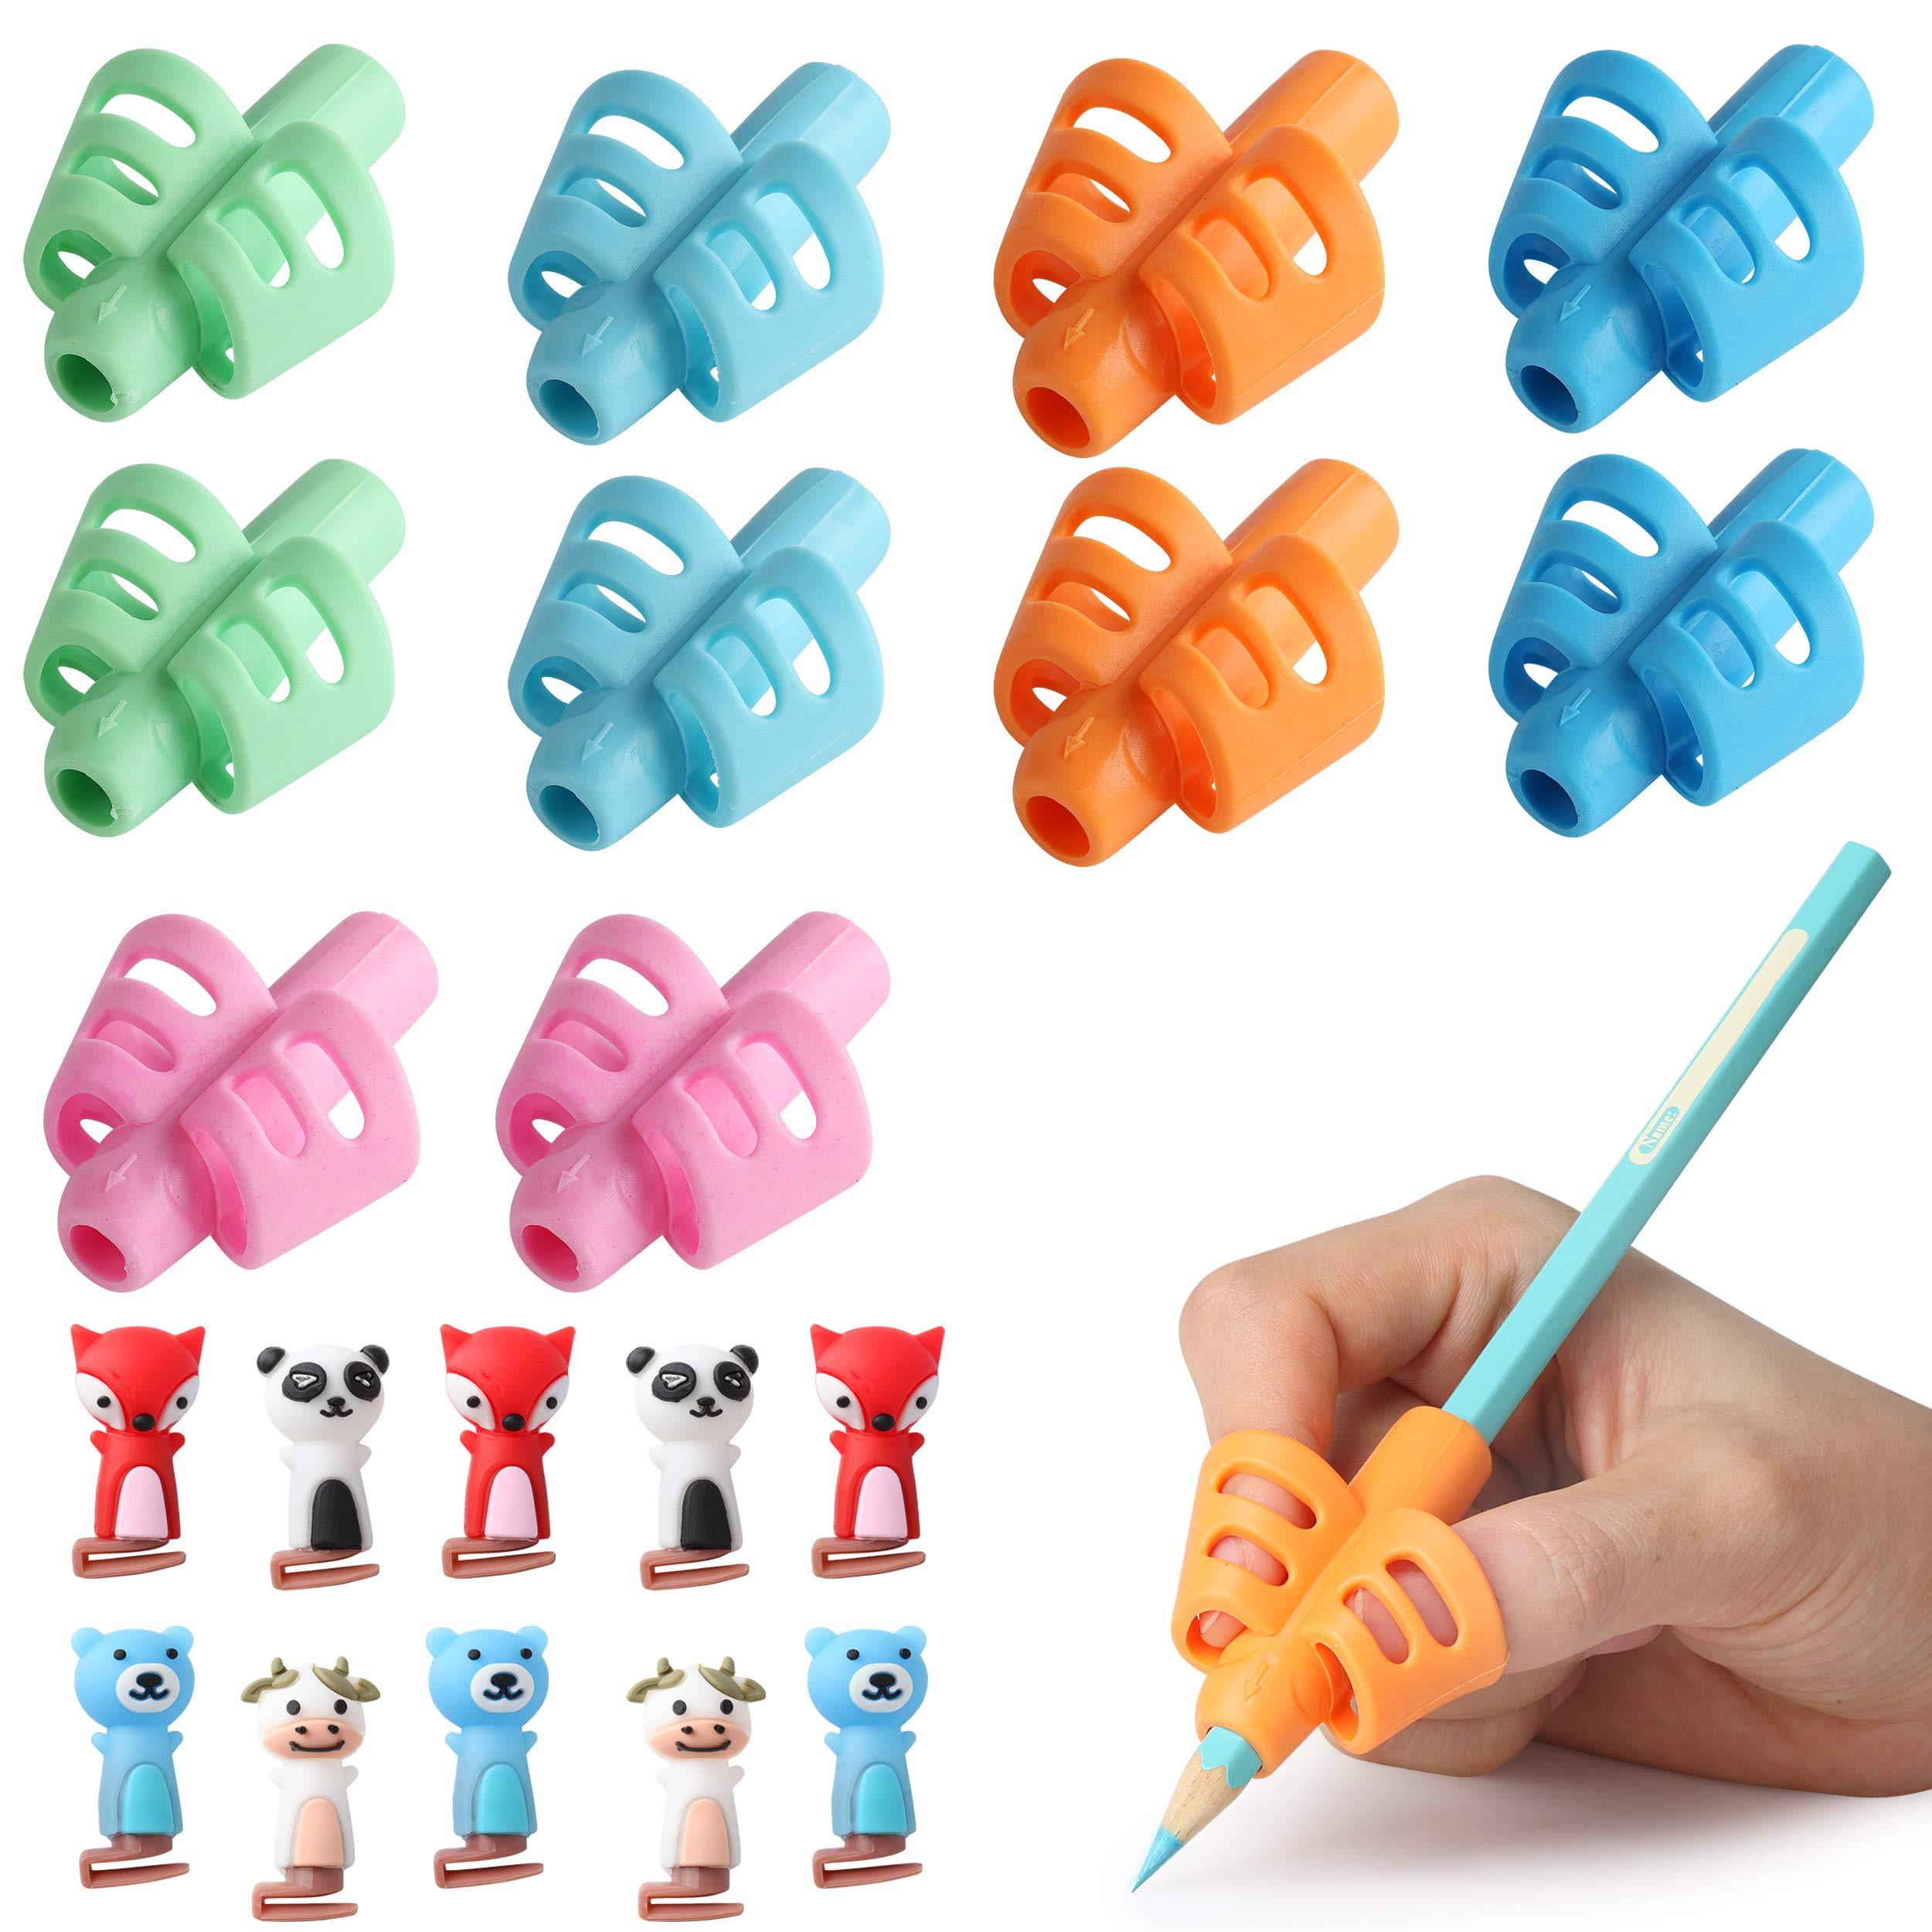 Details about   4 Pcs Silicone Child Kid Handwriting Aid Rubber Pen Soft T K9M7 S4V0 UKPL R3E8 